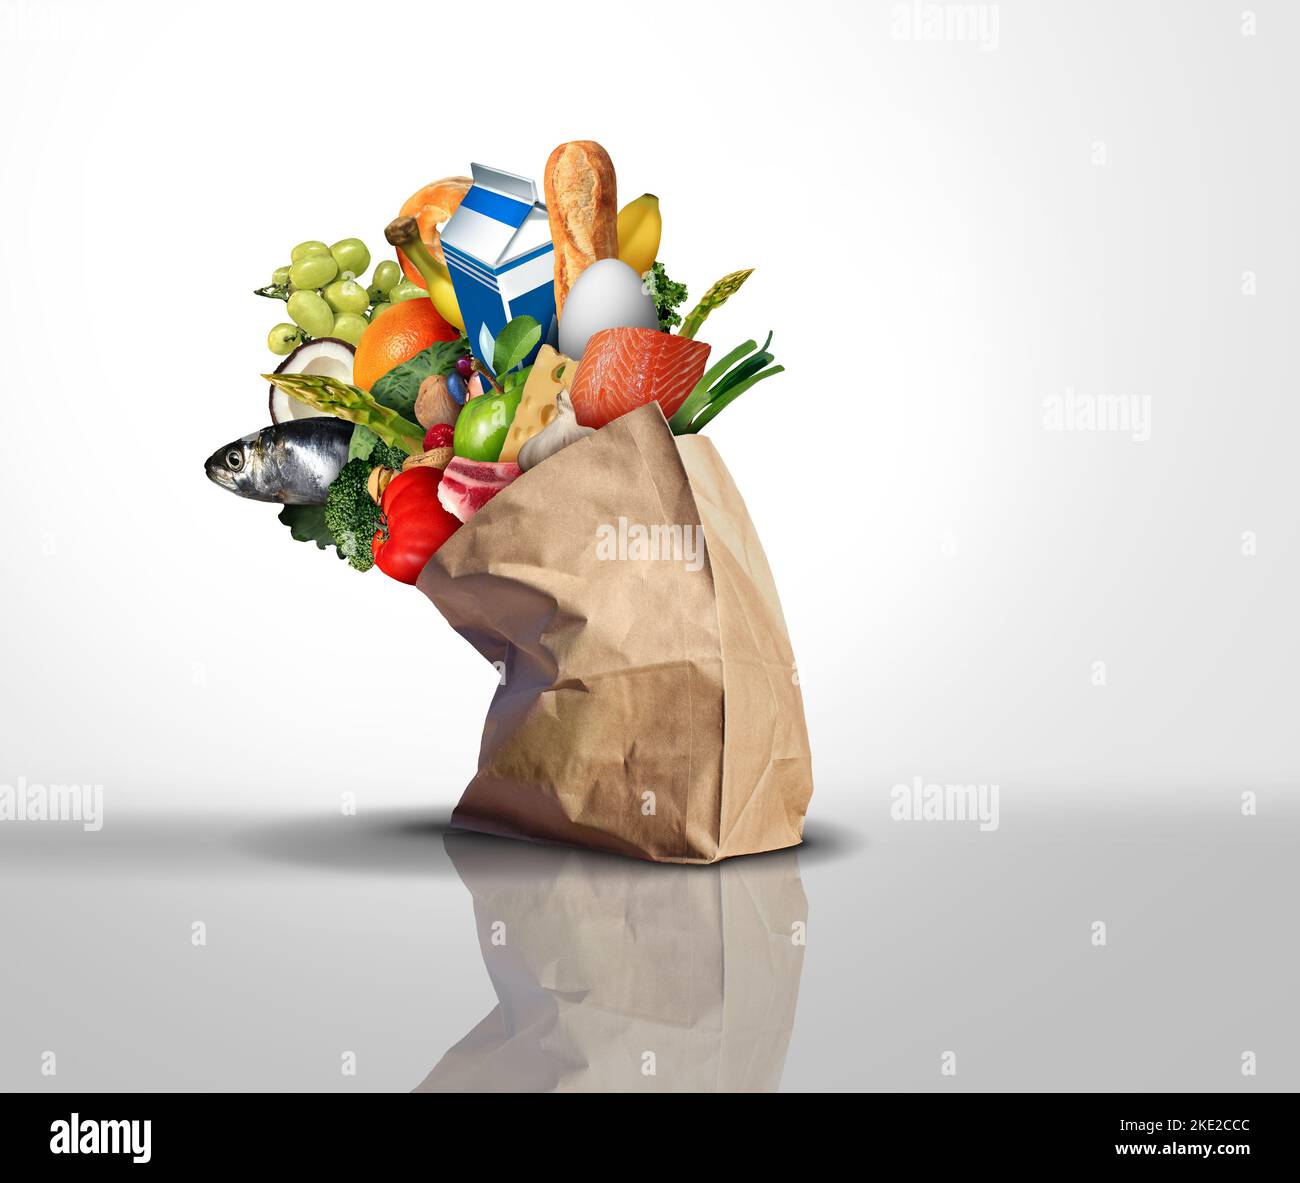 Grocery Bag Full Of Groceries representing consumer prices and food cost or super market price and home budget and family budgeting concept as store Stock Photo